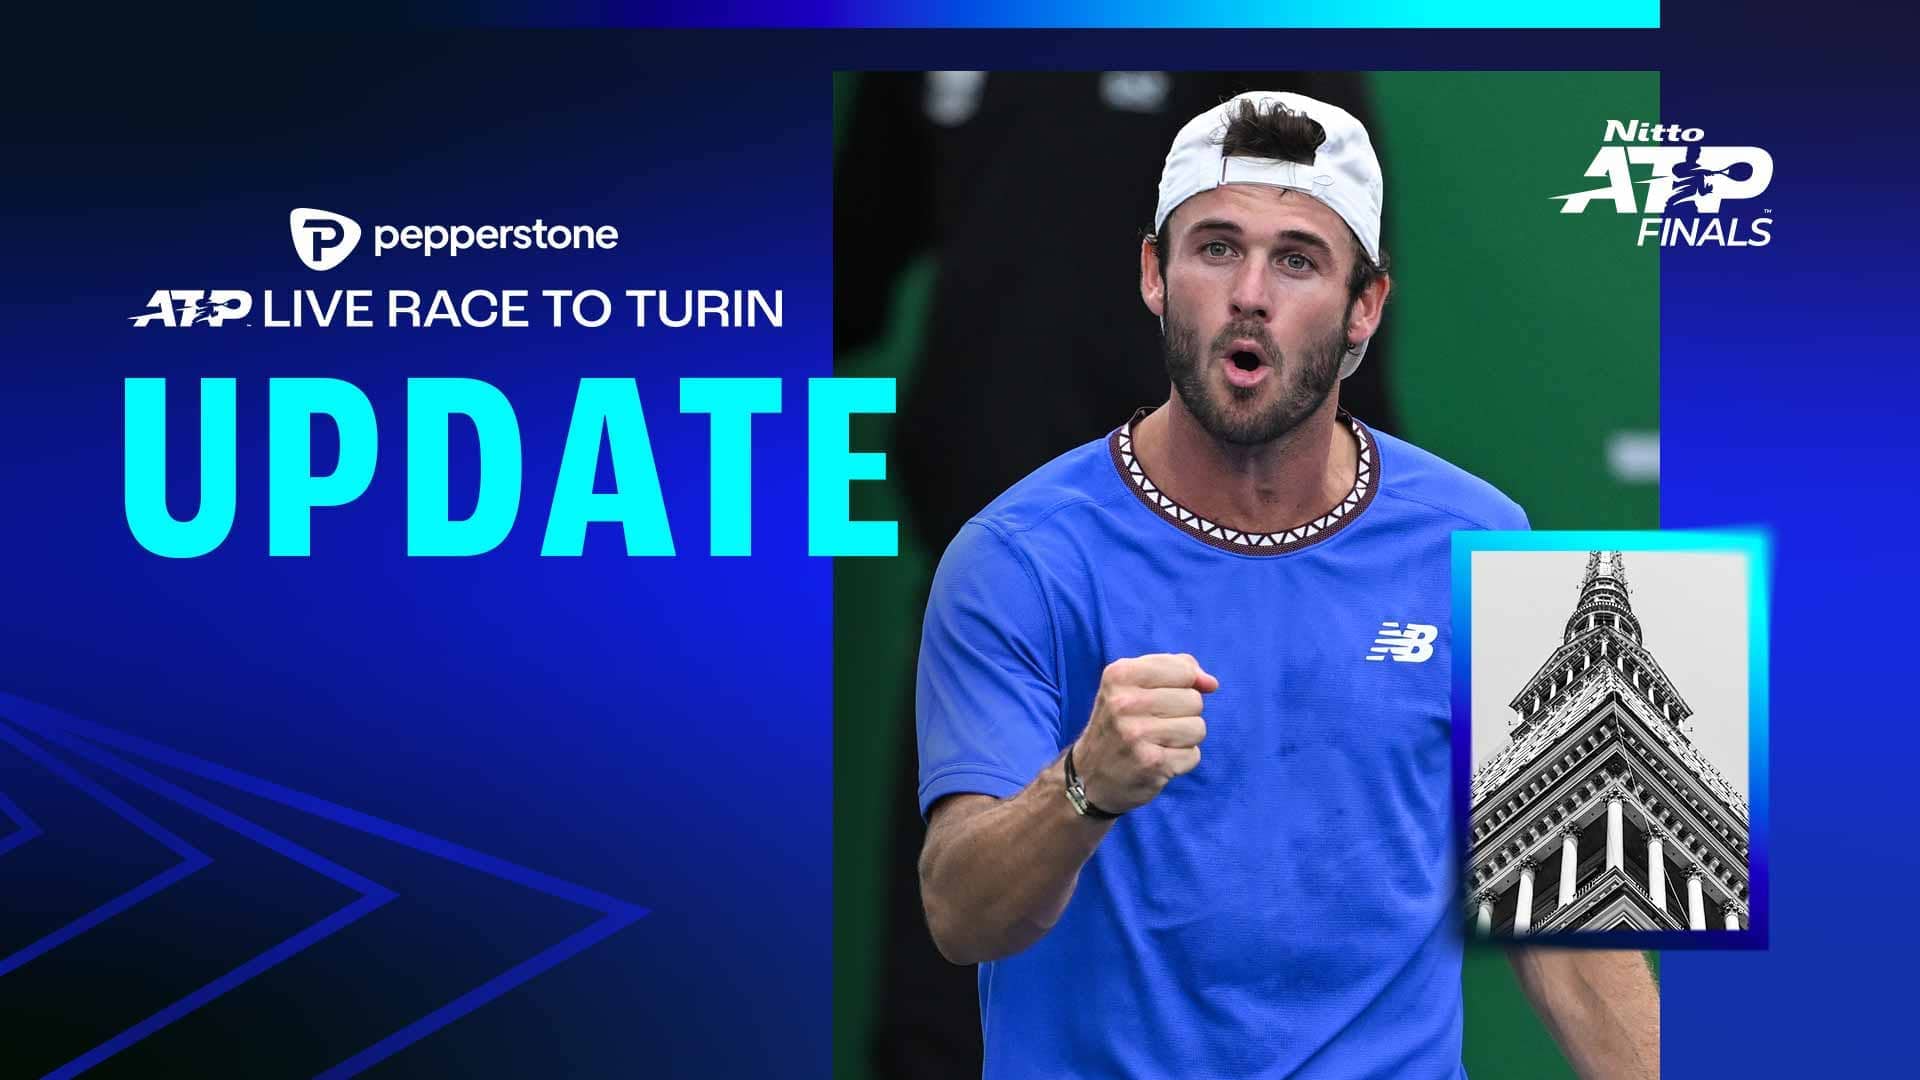 Tommy Paul is trying to qualify for the Nitto ATP Finals for the first time.